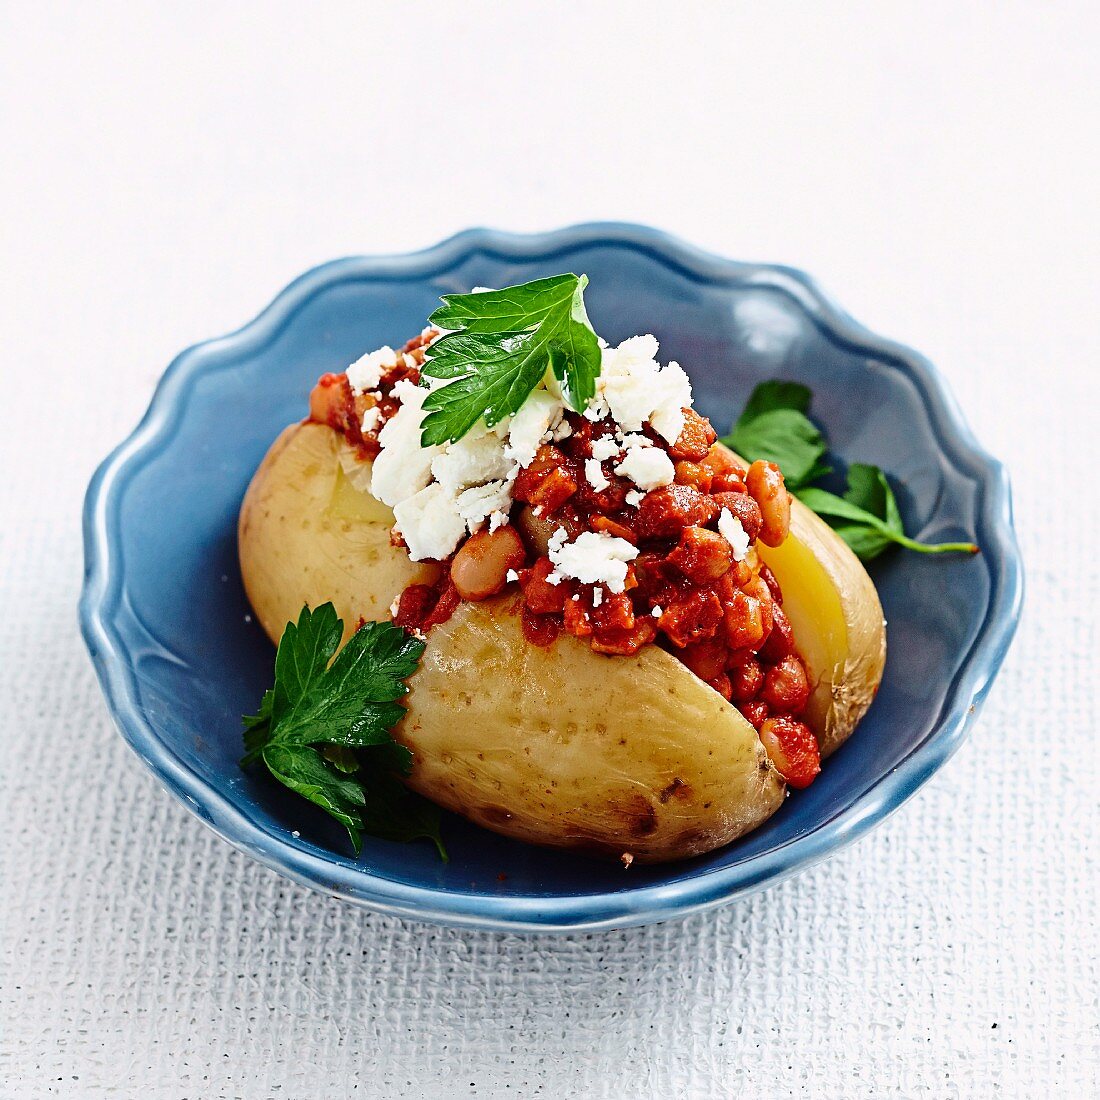 Baked potato with bacon and beans